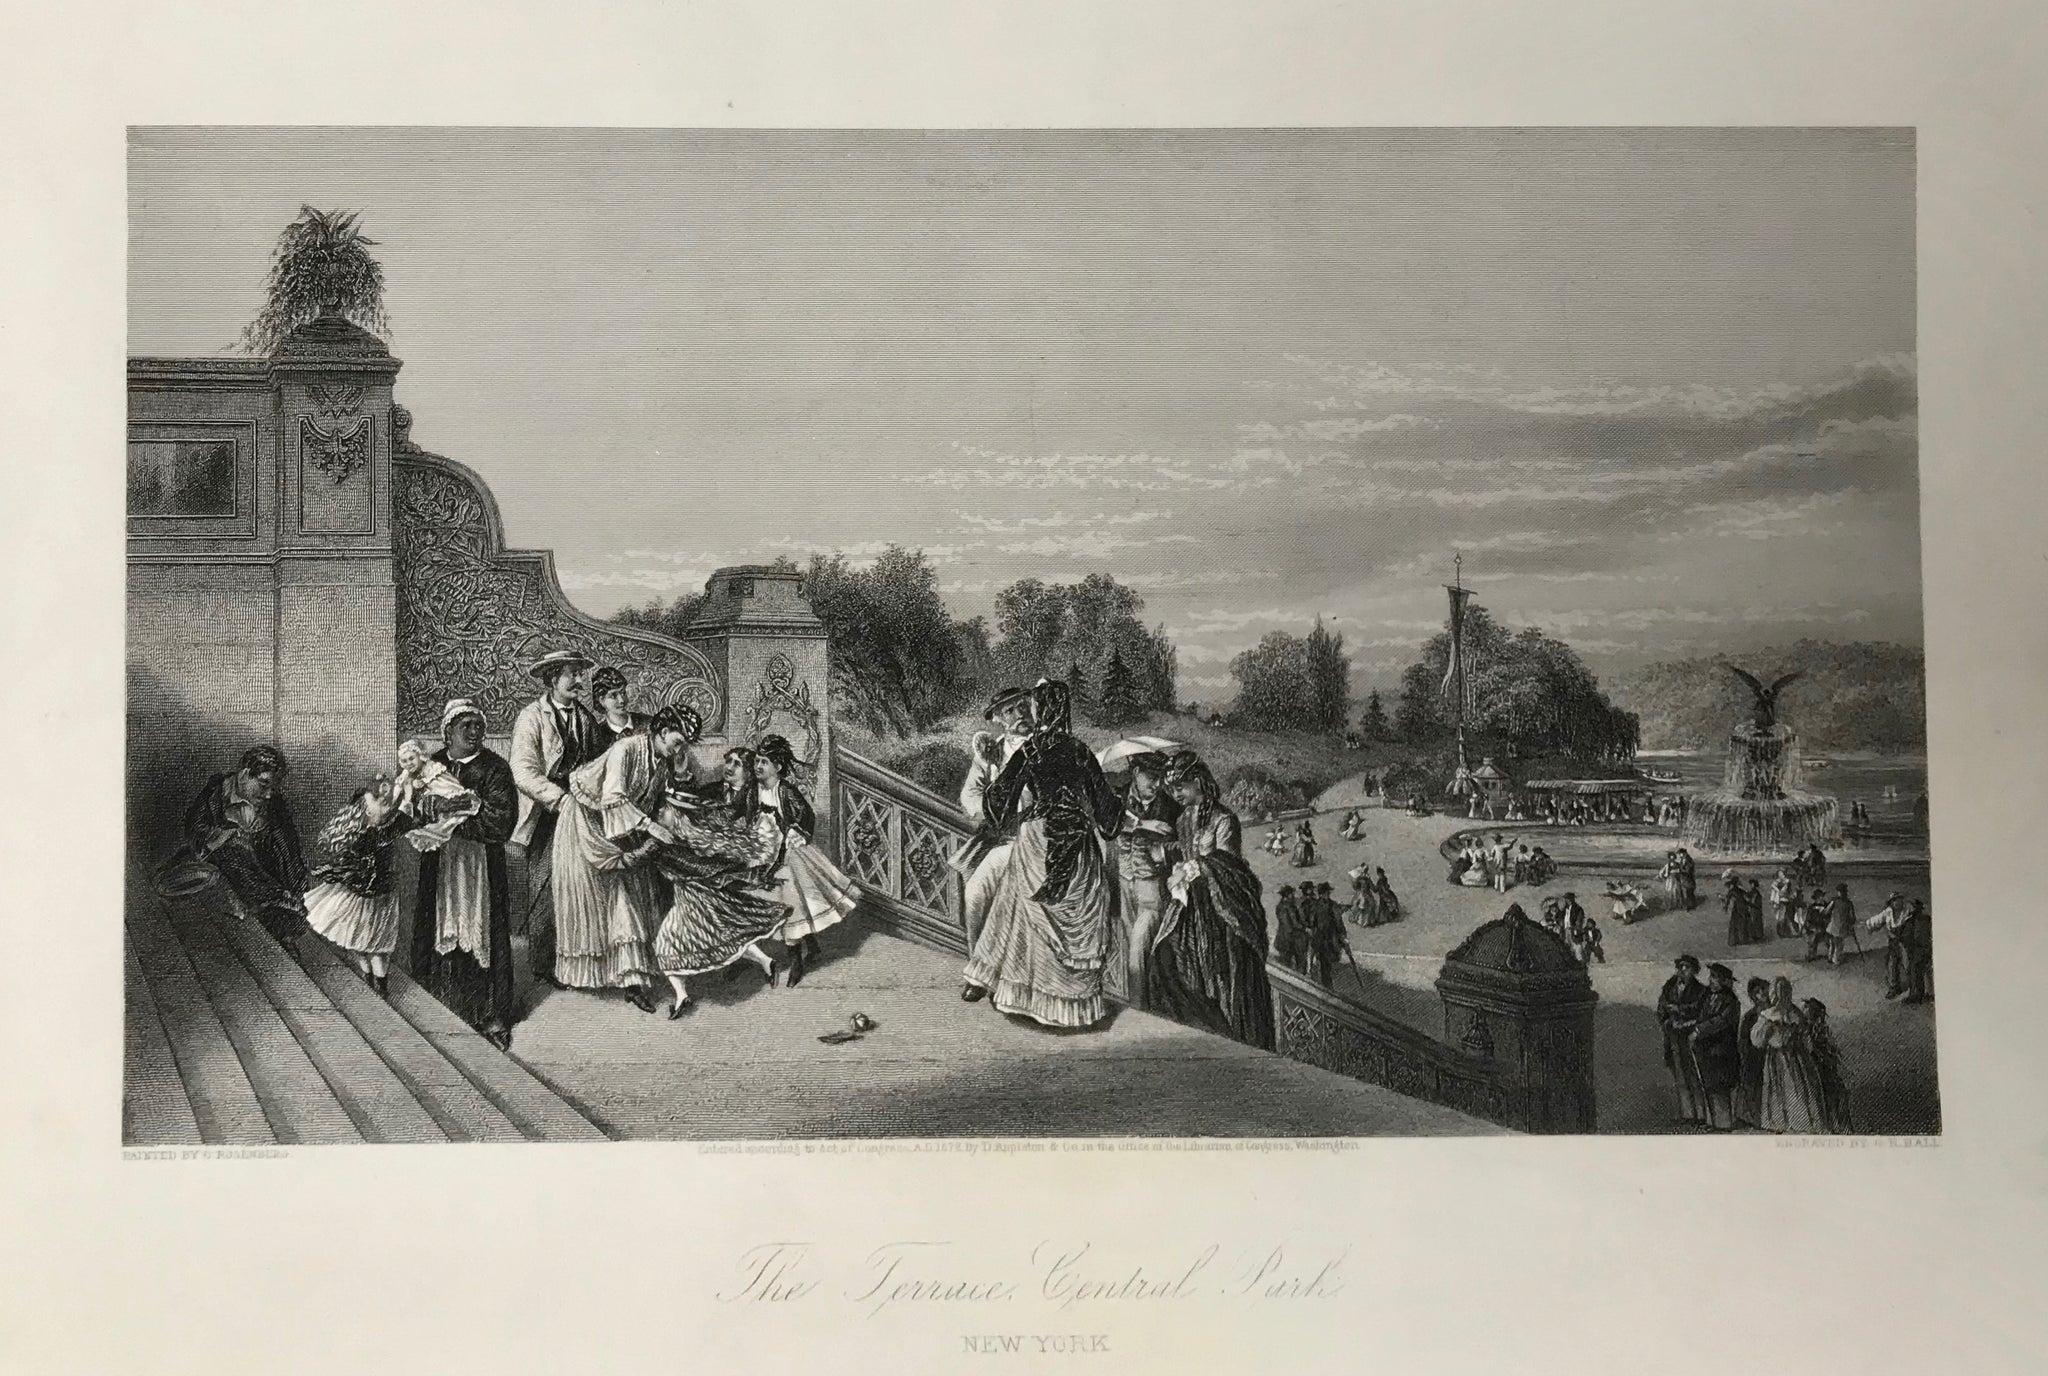 USA, New York, "The Terrace, Central Park"  Fine steel engraving by G. R. Hall after Rosenberg ca 1860.